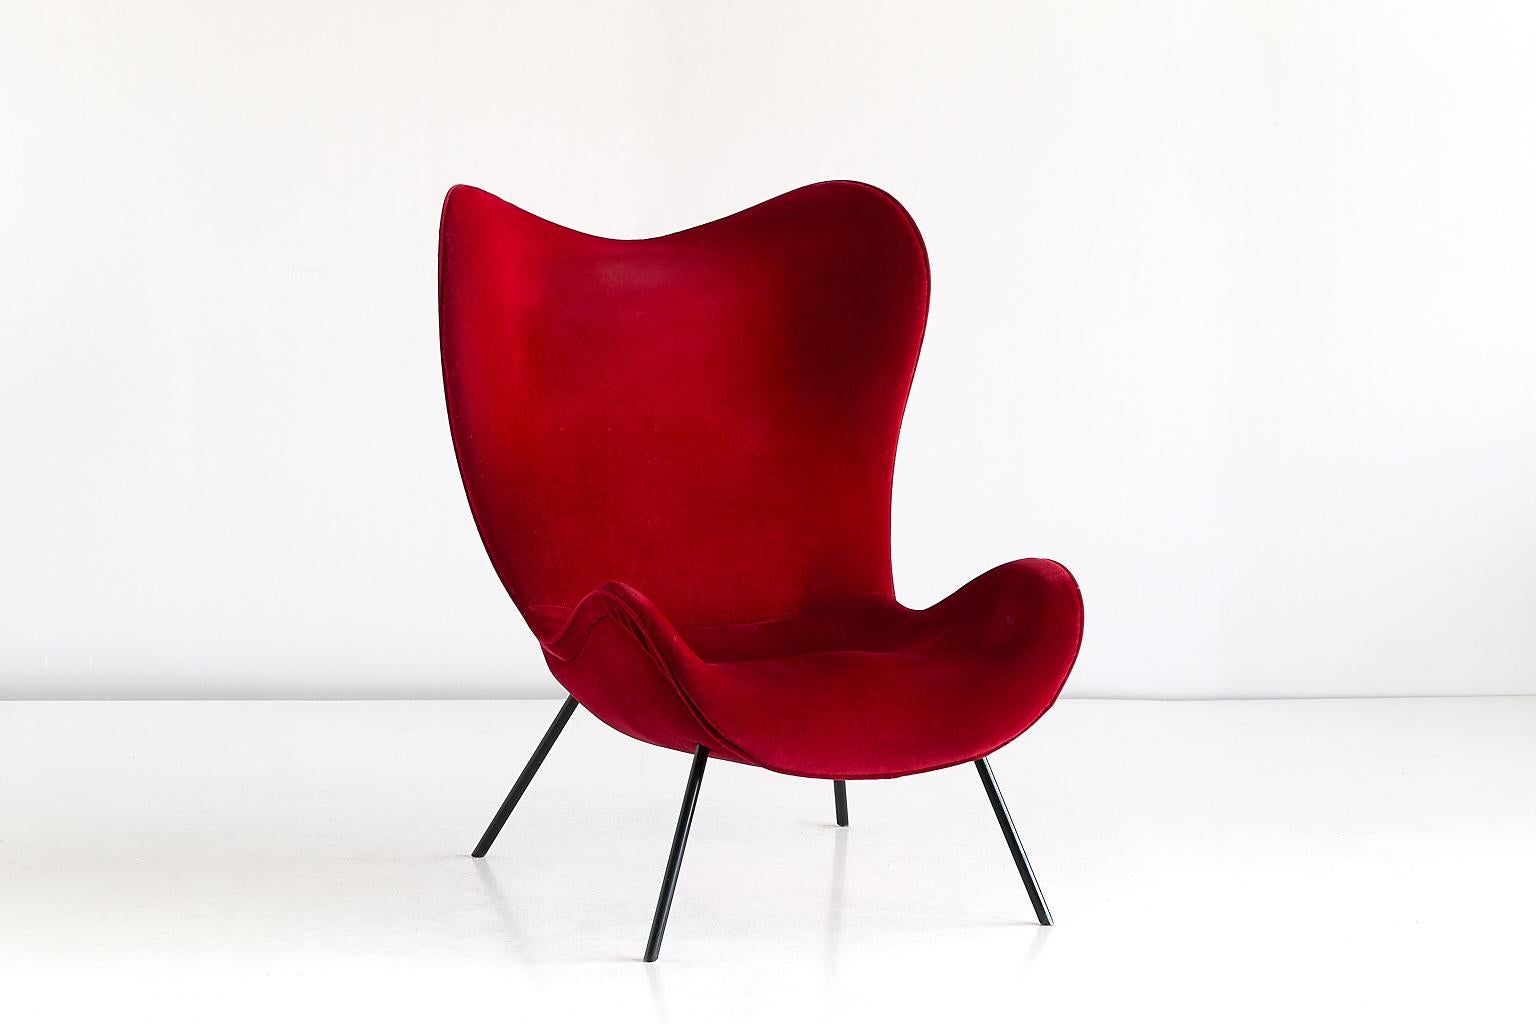 This rare 'Madame' lounge chair was designed by Fritz Neth and produced by the Correcta Sitzformbau Company in Kassel, Germany in the early 1950s. The organically shaped seat gives the chair a sculptural and striking appearance. The chair is very